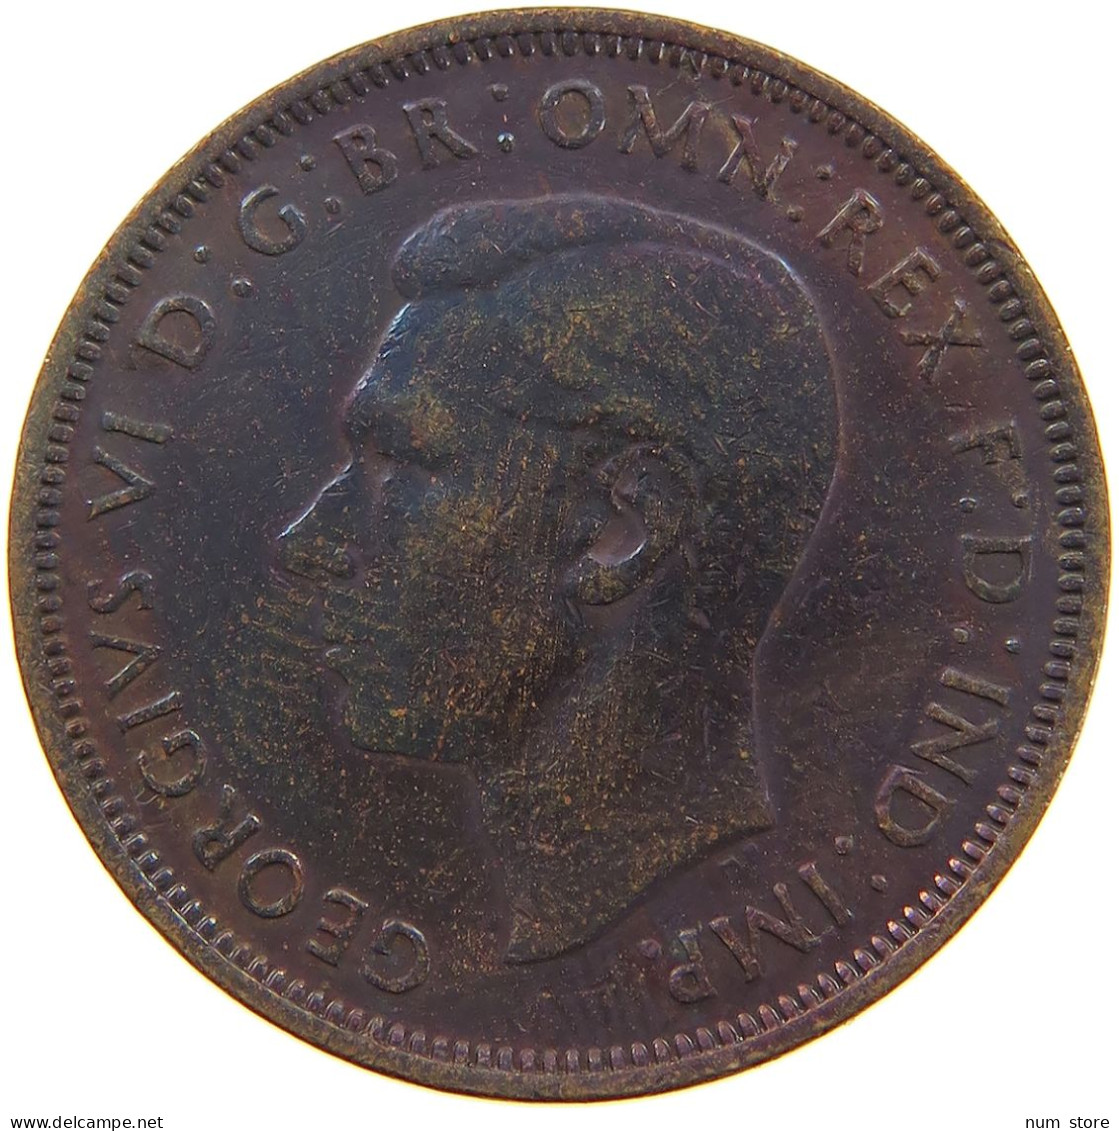 GREAT BRITAIN HALFPENNY 1944 #a042 0251 - C. 1/2 Penny